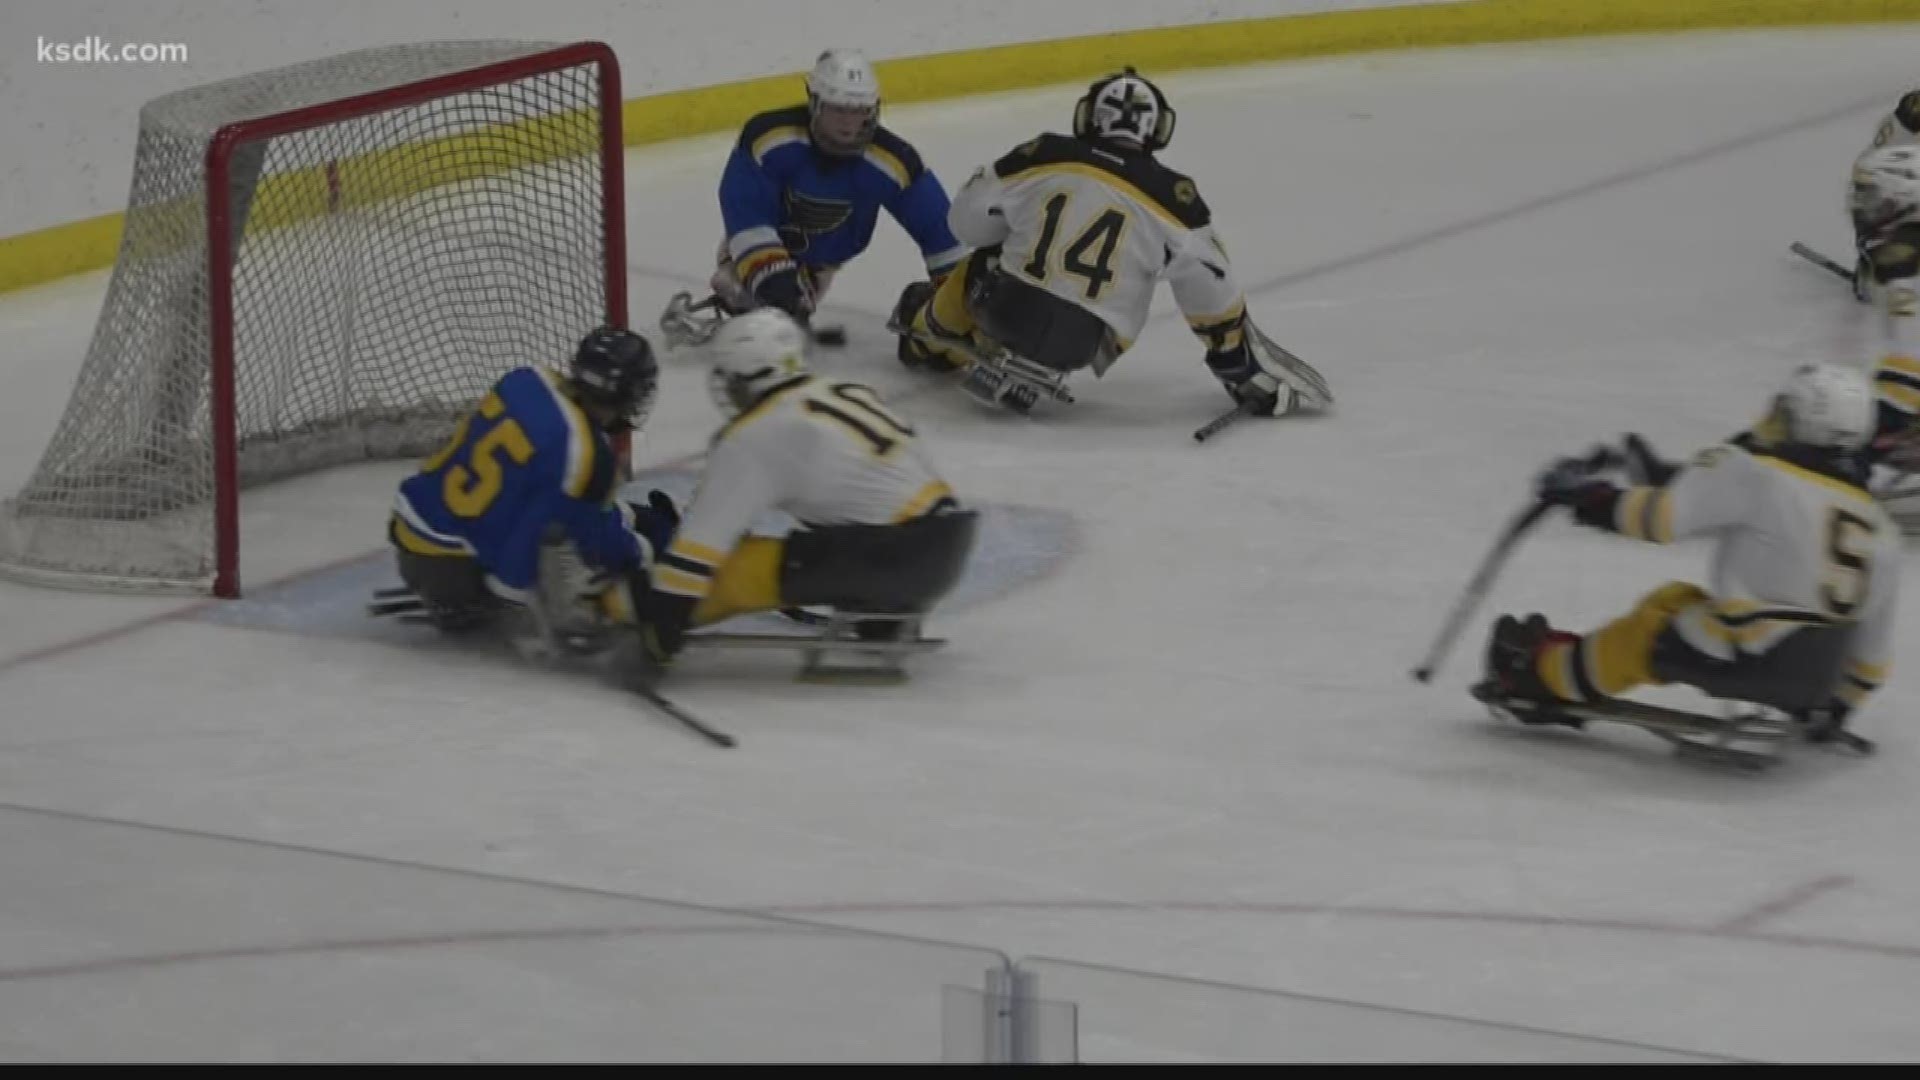 The 10th Annual USA Hockey Sled Classic took place in St. Louis.